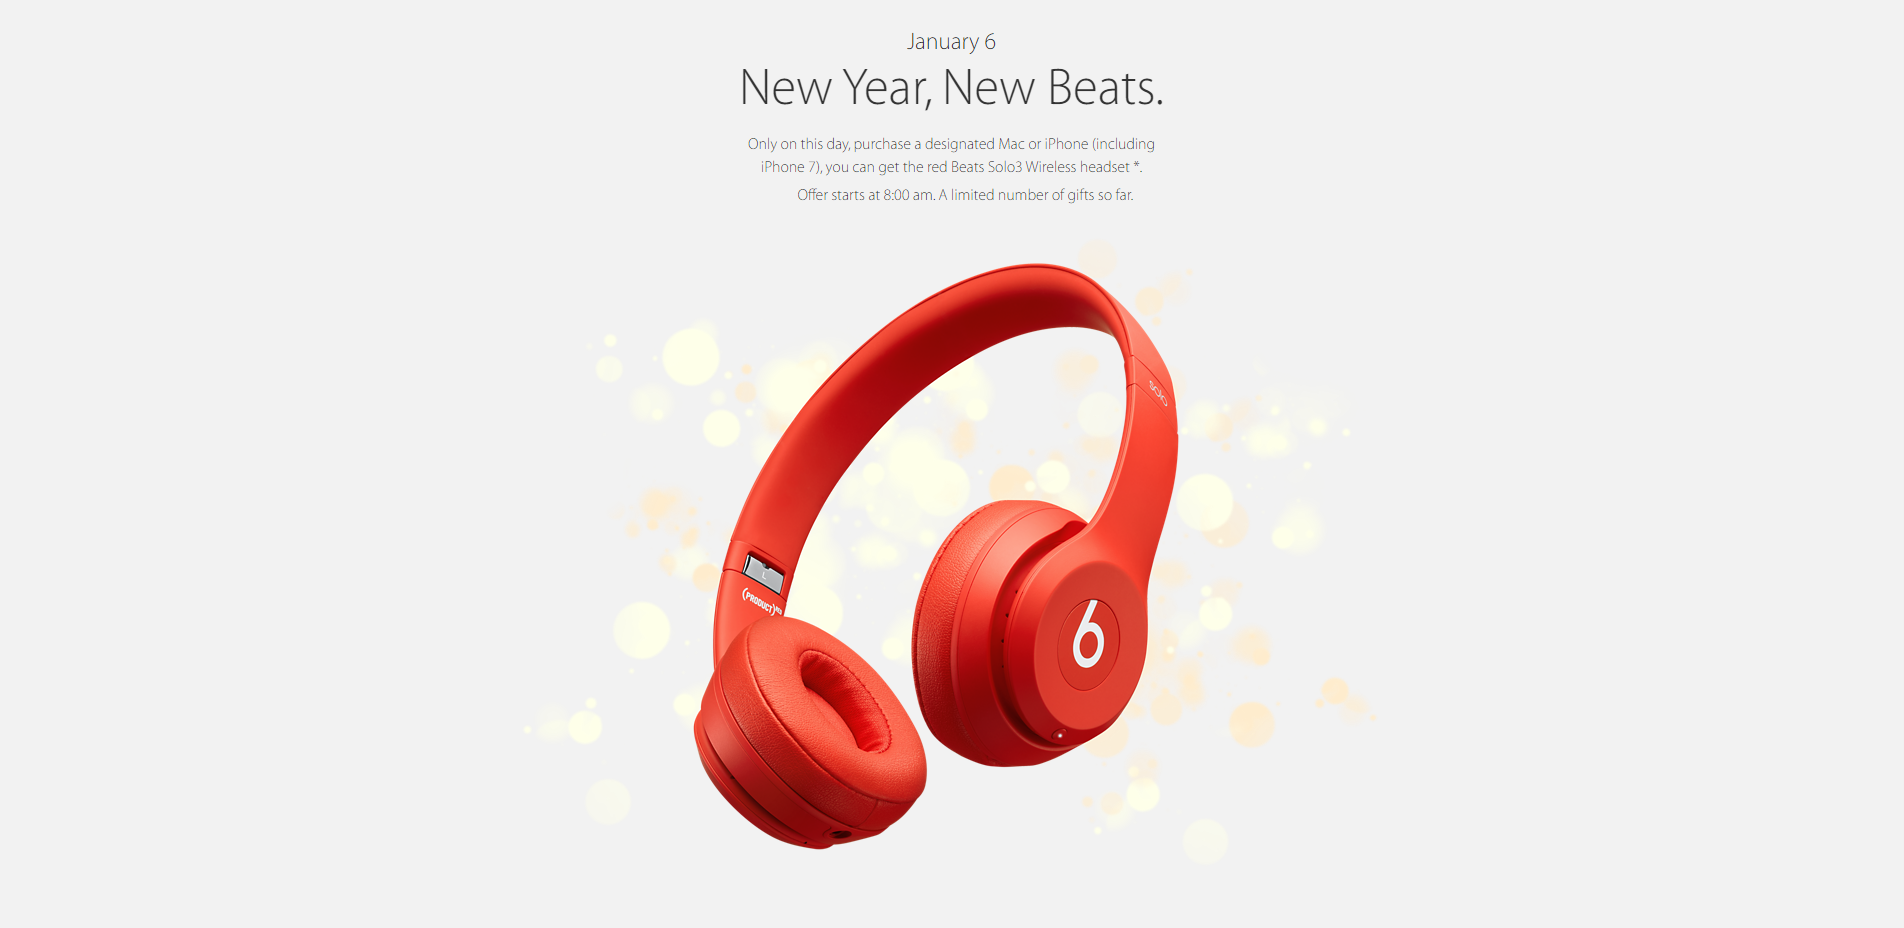 Apple are giving away Beats headphones to celebrate Chinese New Year